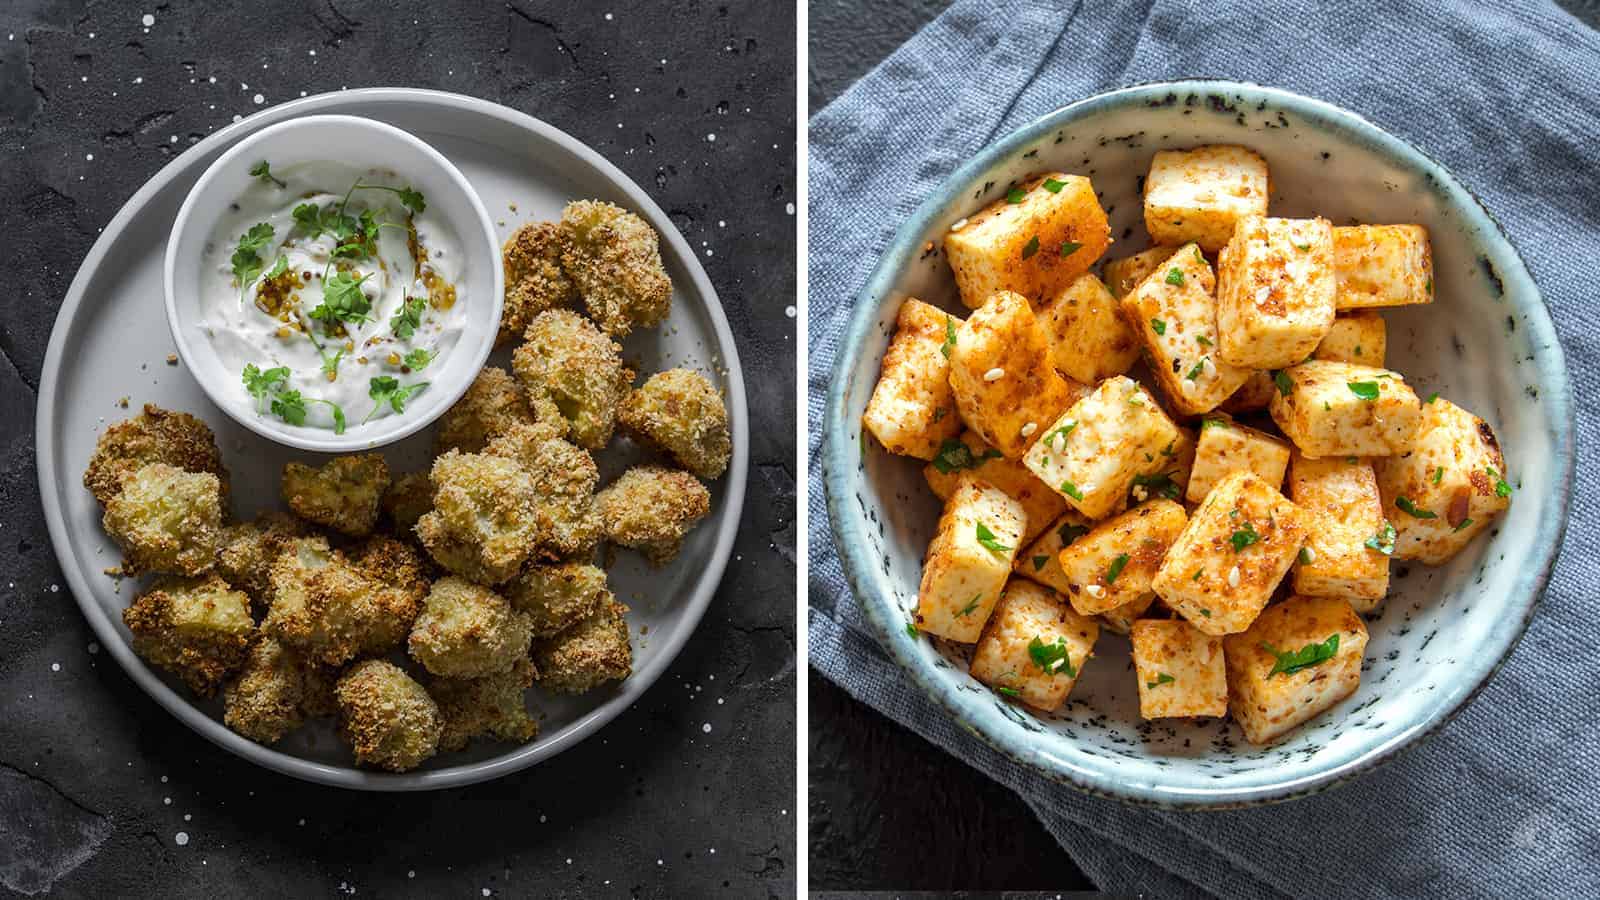 10 Plant-Based Recipes So Good You Won’t Miss Meat